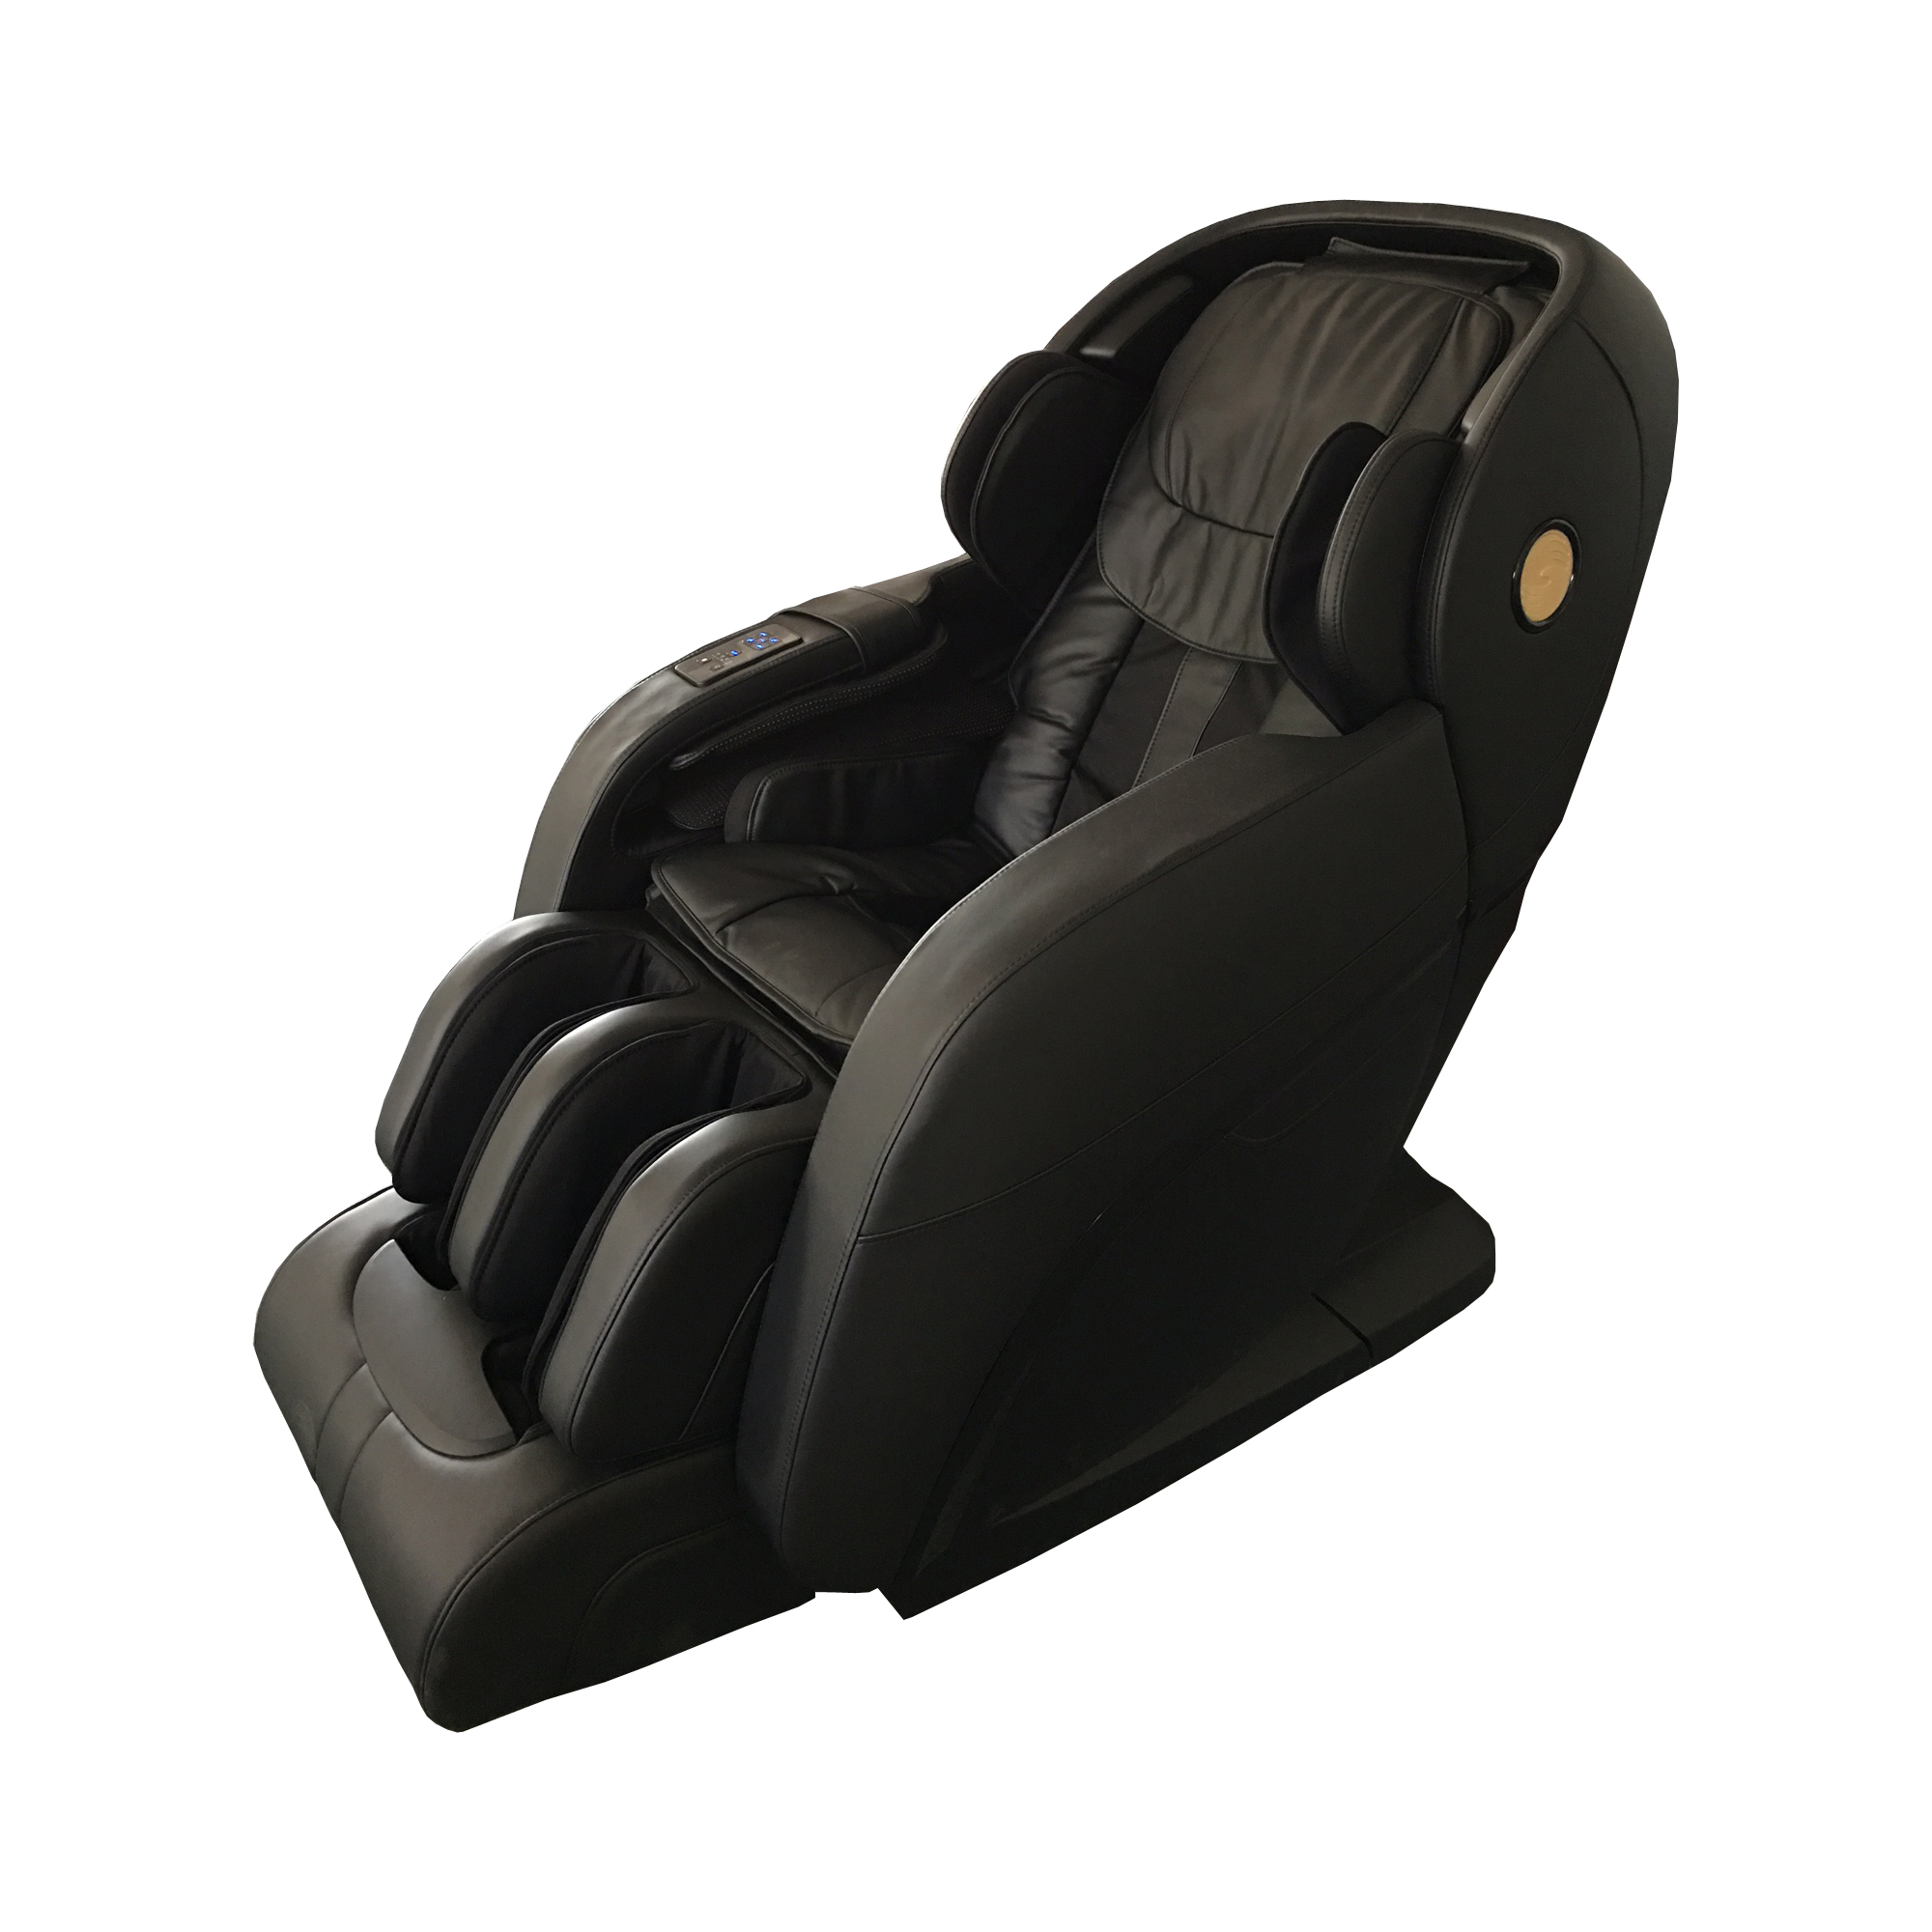 CH4000 Deluxe Massage Chair Image